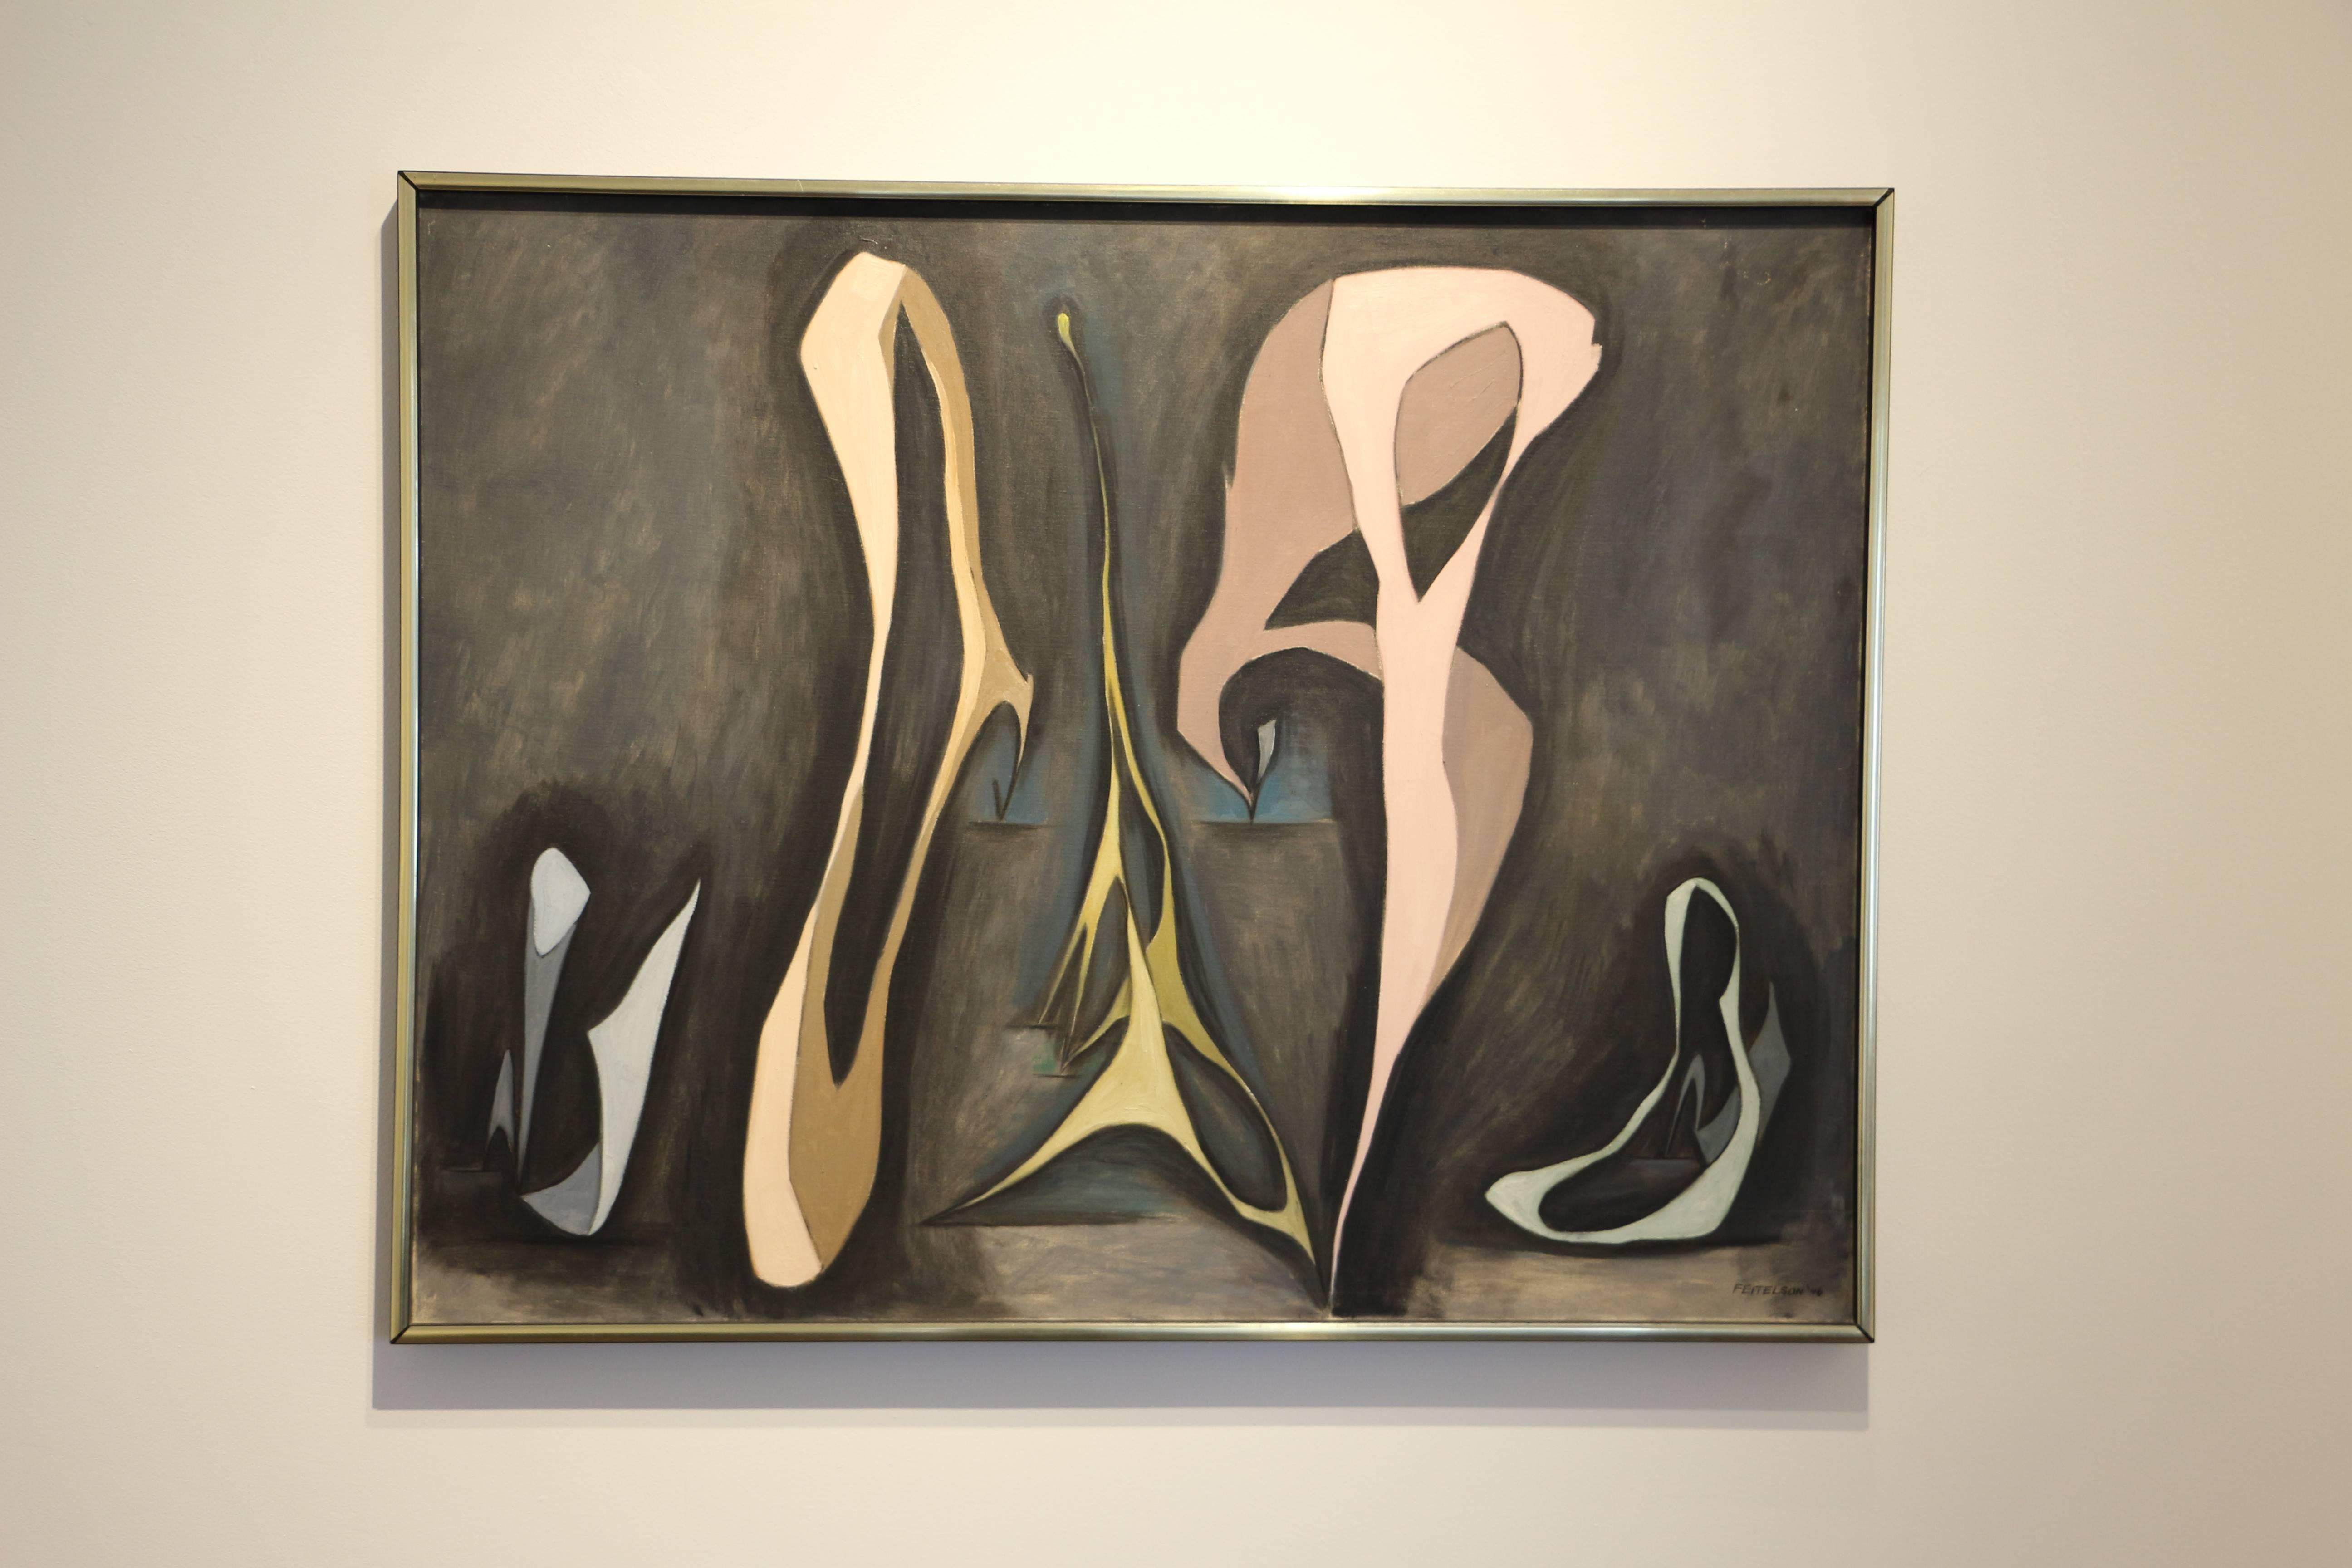 Mirabilia, Magical Forms, post-surreal abstract oil painting with morphing forms - Painting by Lorser Feitelson